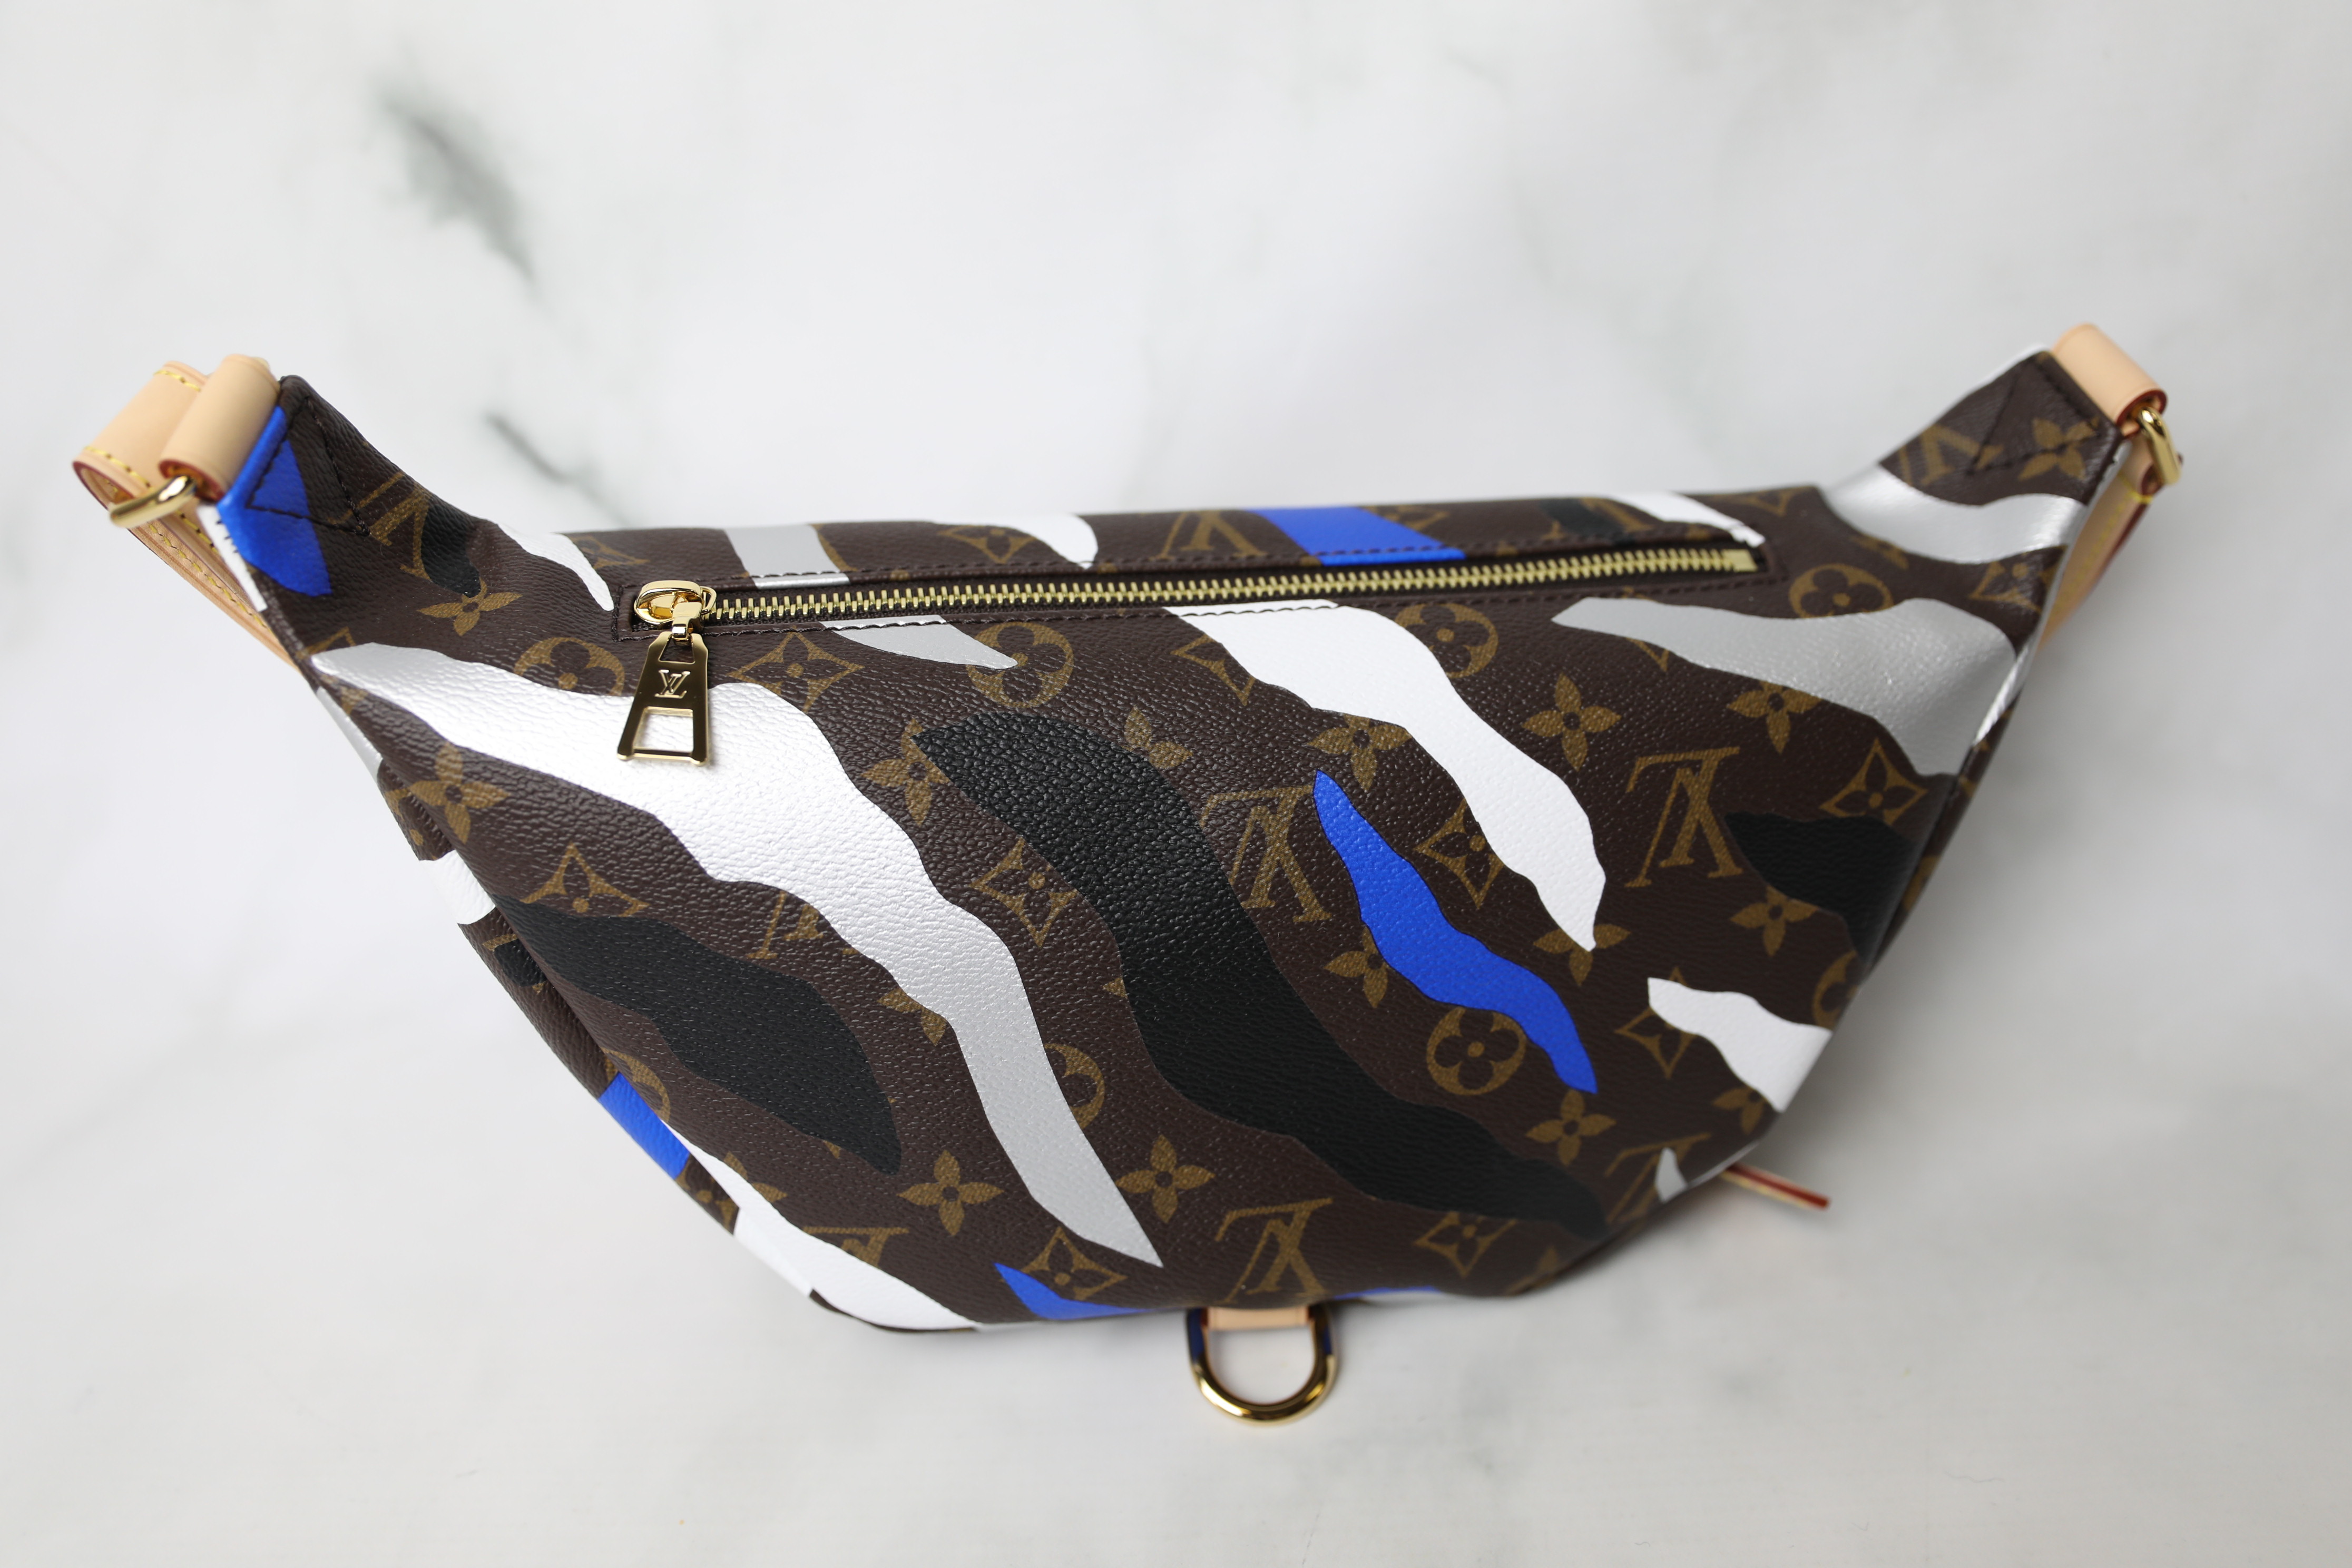 Louis Vuitton League of Legends BumBag, New in Dustbag WA001